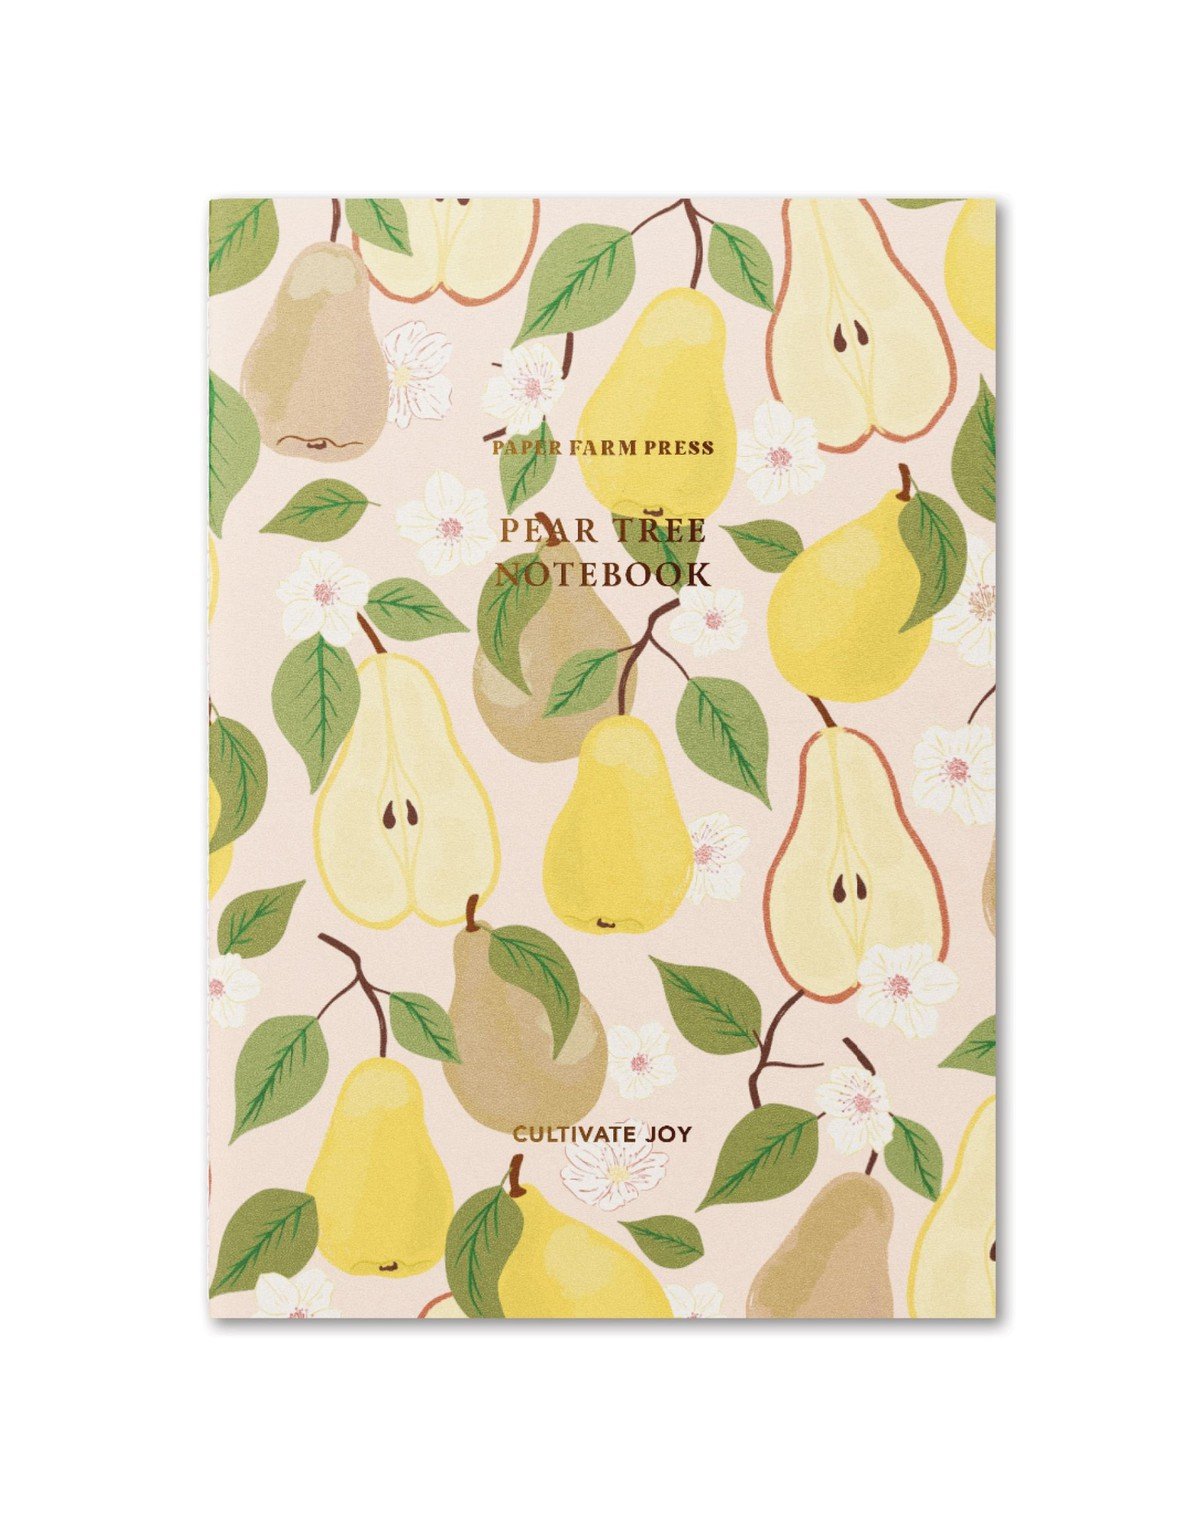 Cultivate Joy Pear Tree Stitched Notebook item